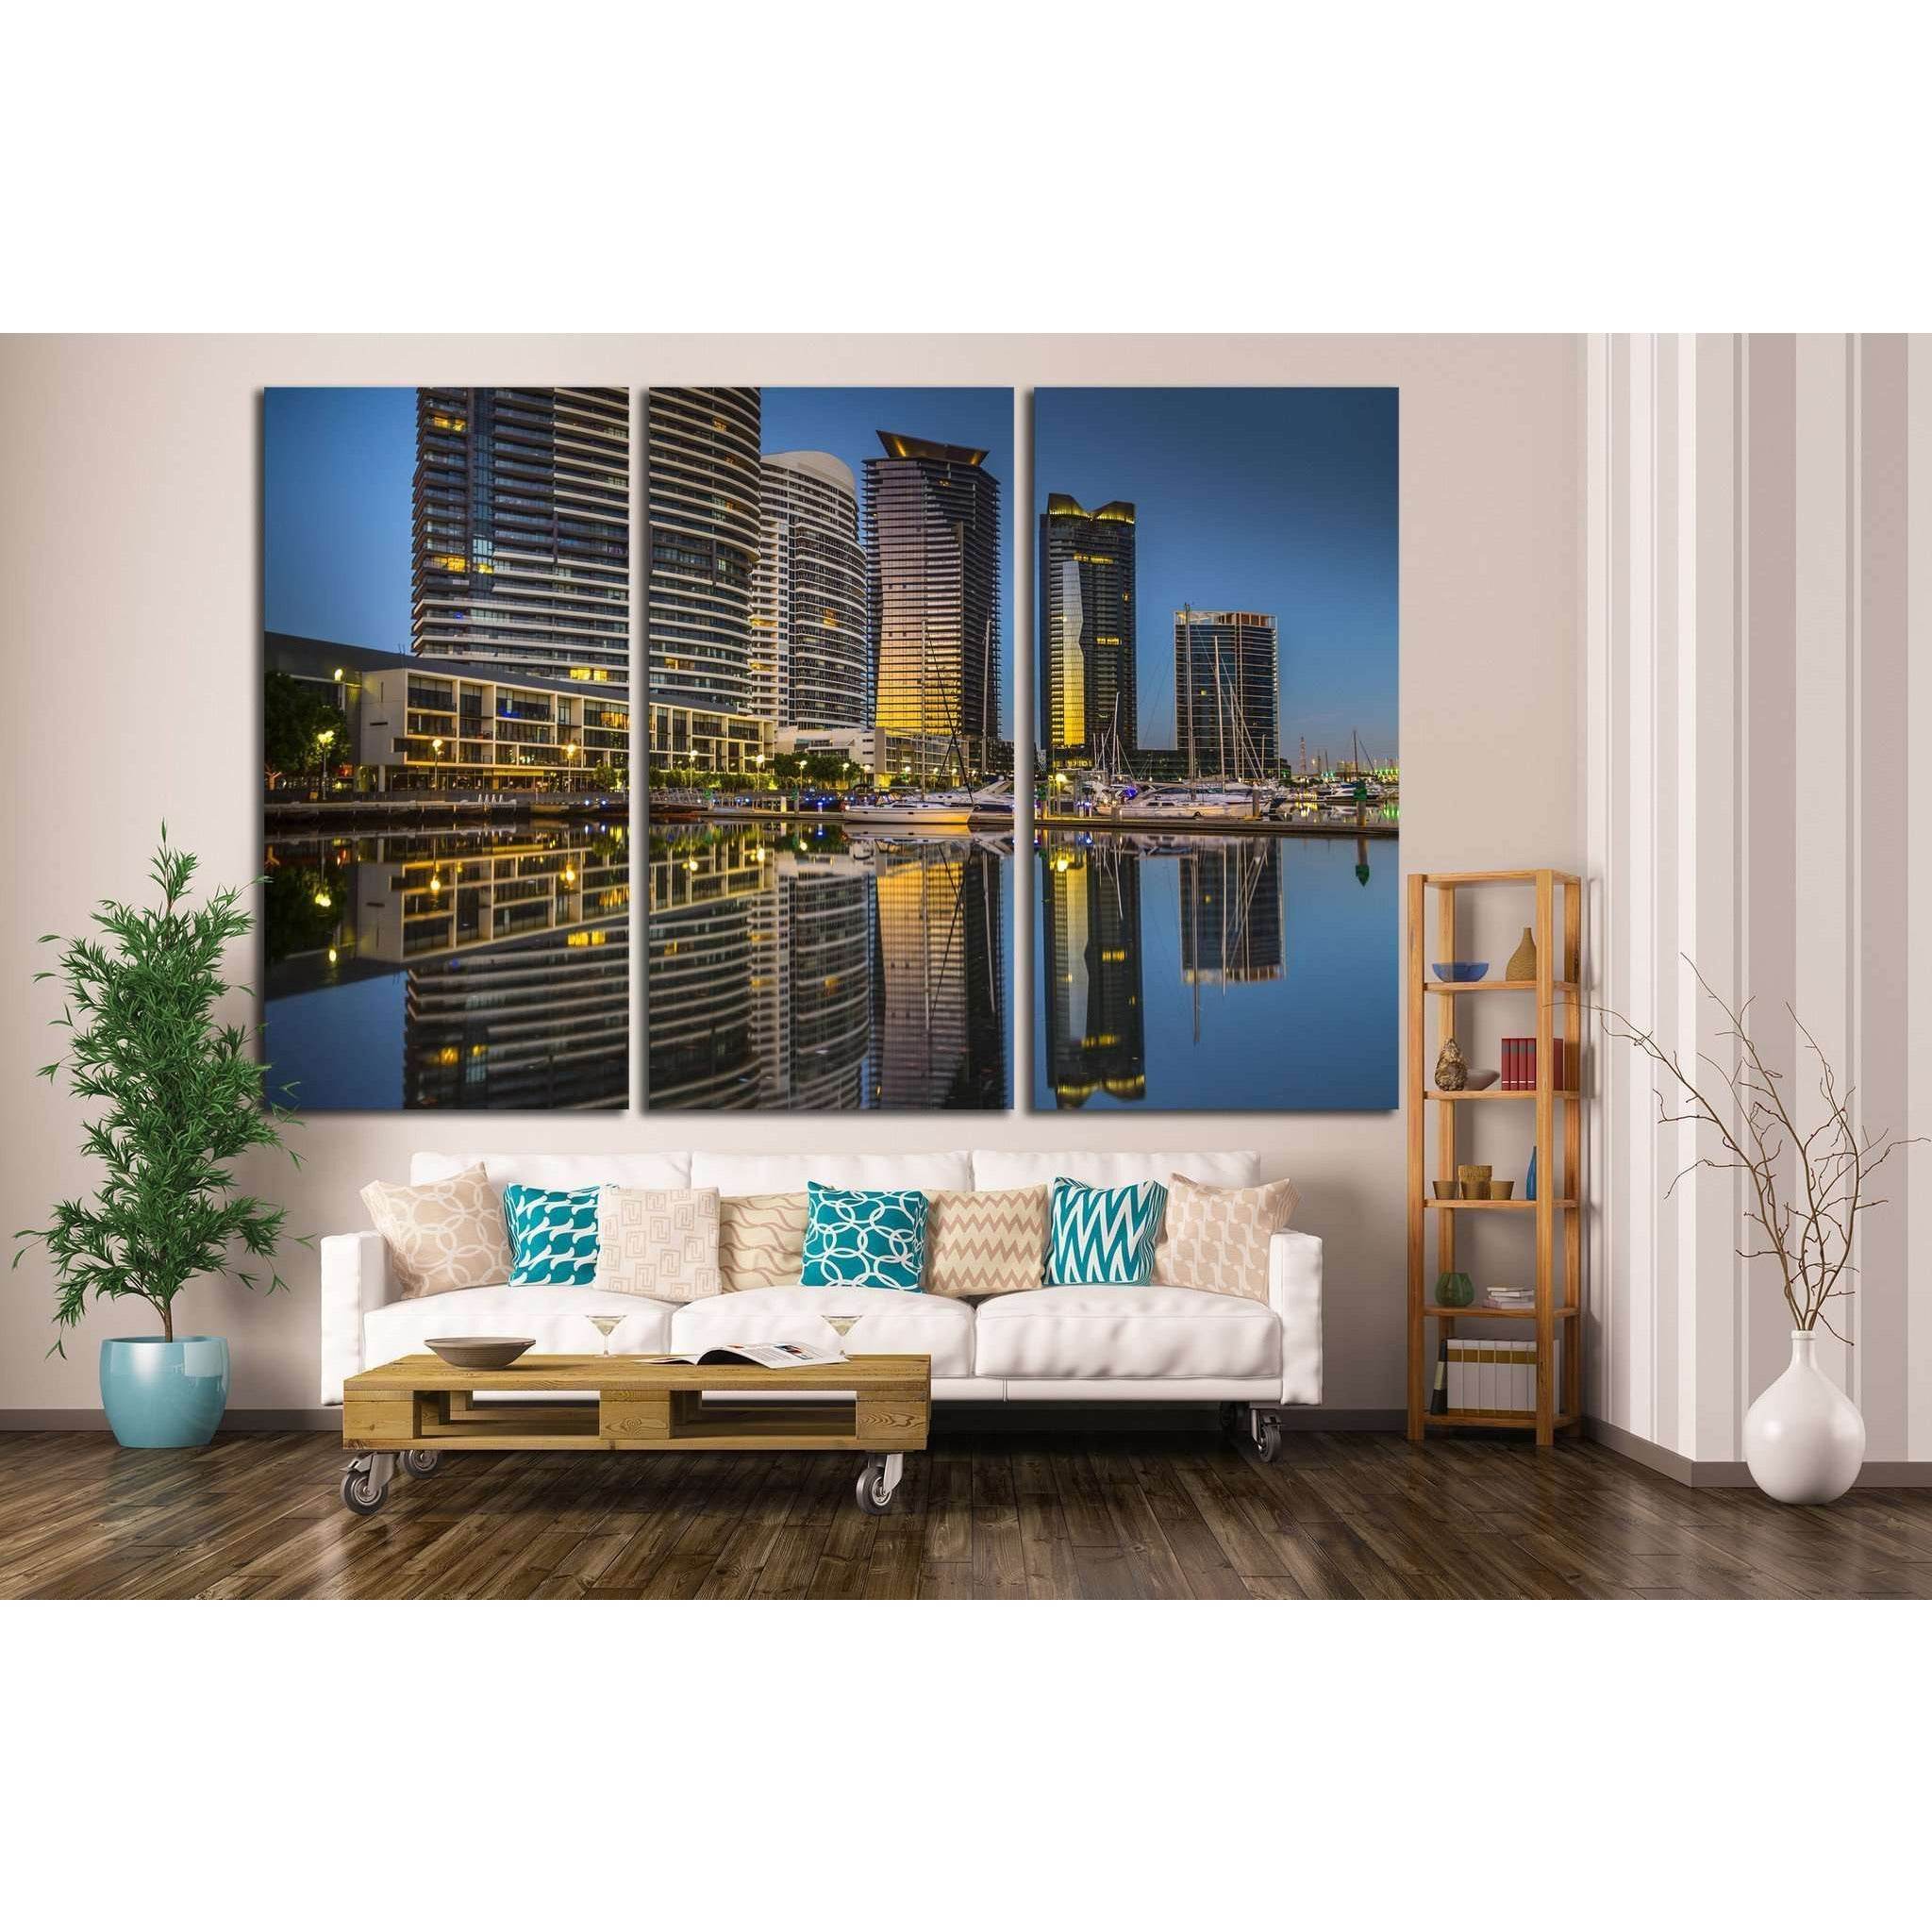 Melbourne city №812 Ready to Hang Canvas Print